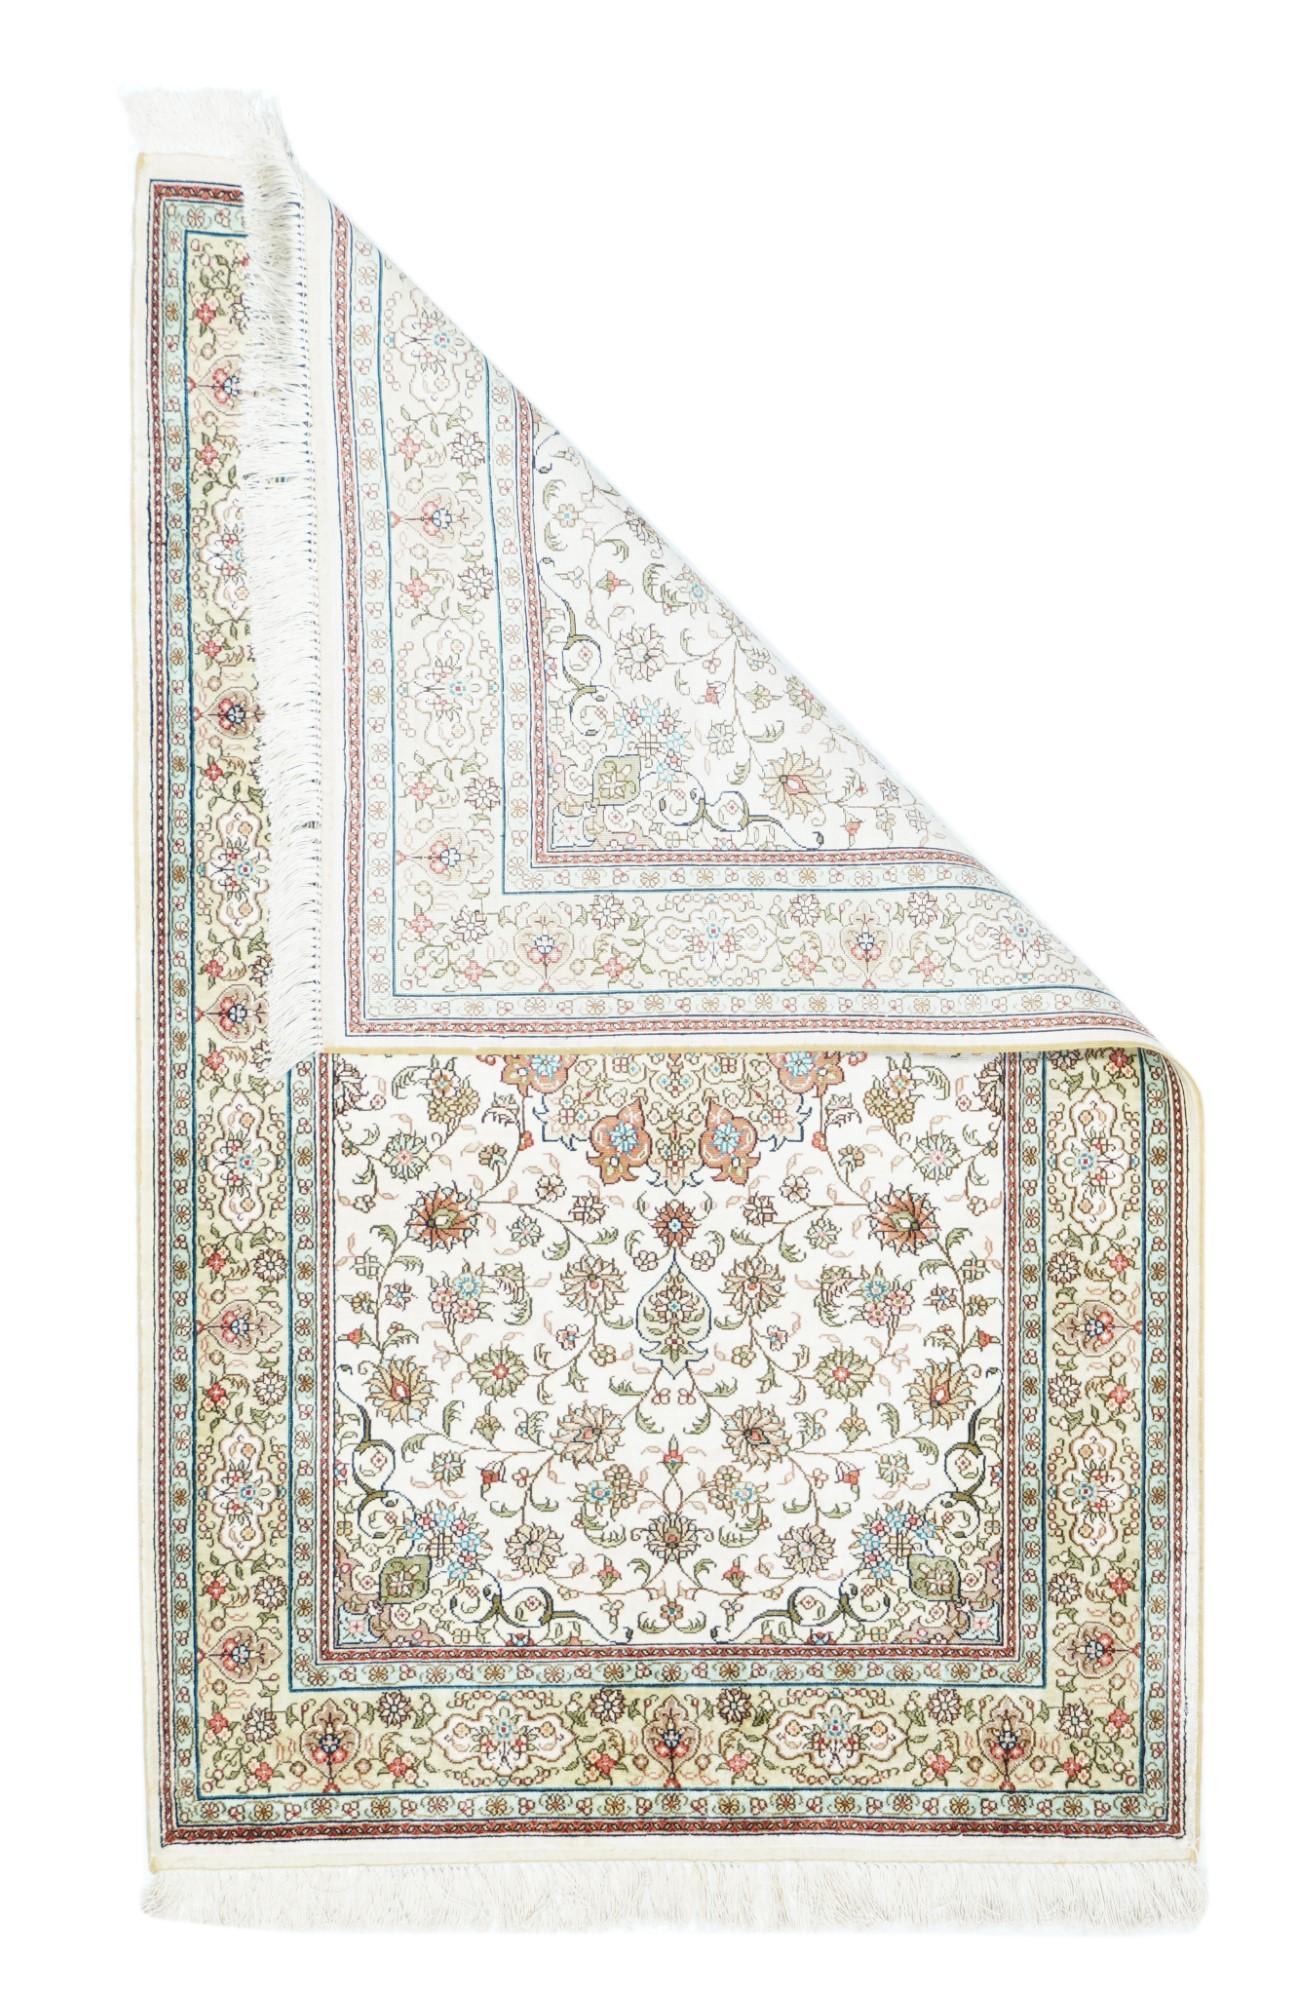 Persian Design Silk Rug 2'8'' x 4'2''. In the Persian Isfahan style, with eight plus eight straw and rose-rust round medallion, within an arabesque vinery accented with palmettes, and single and triple rosettes. Pale straw border with ecru